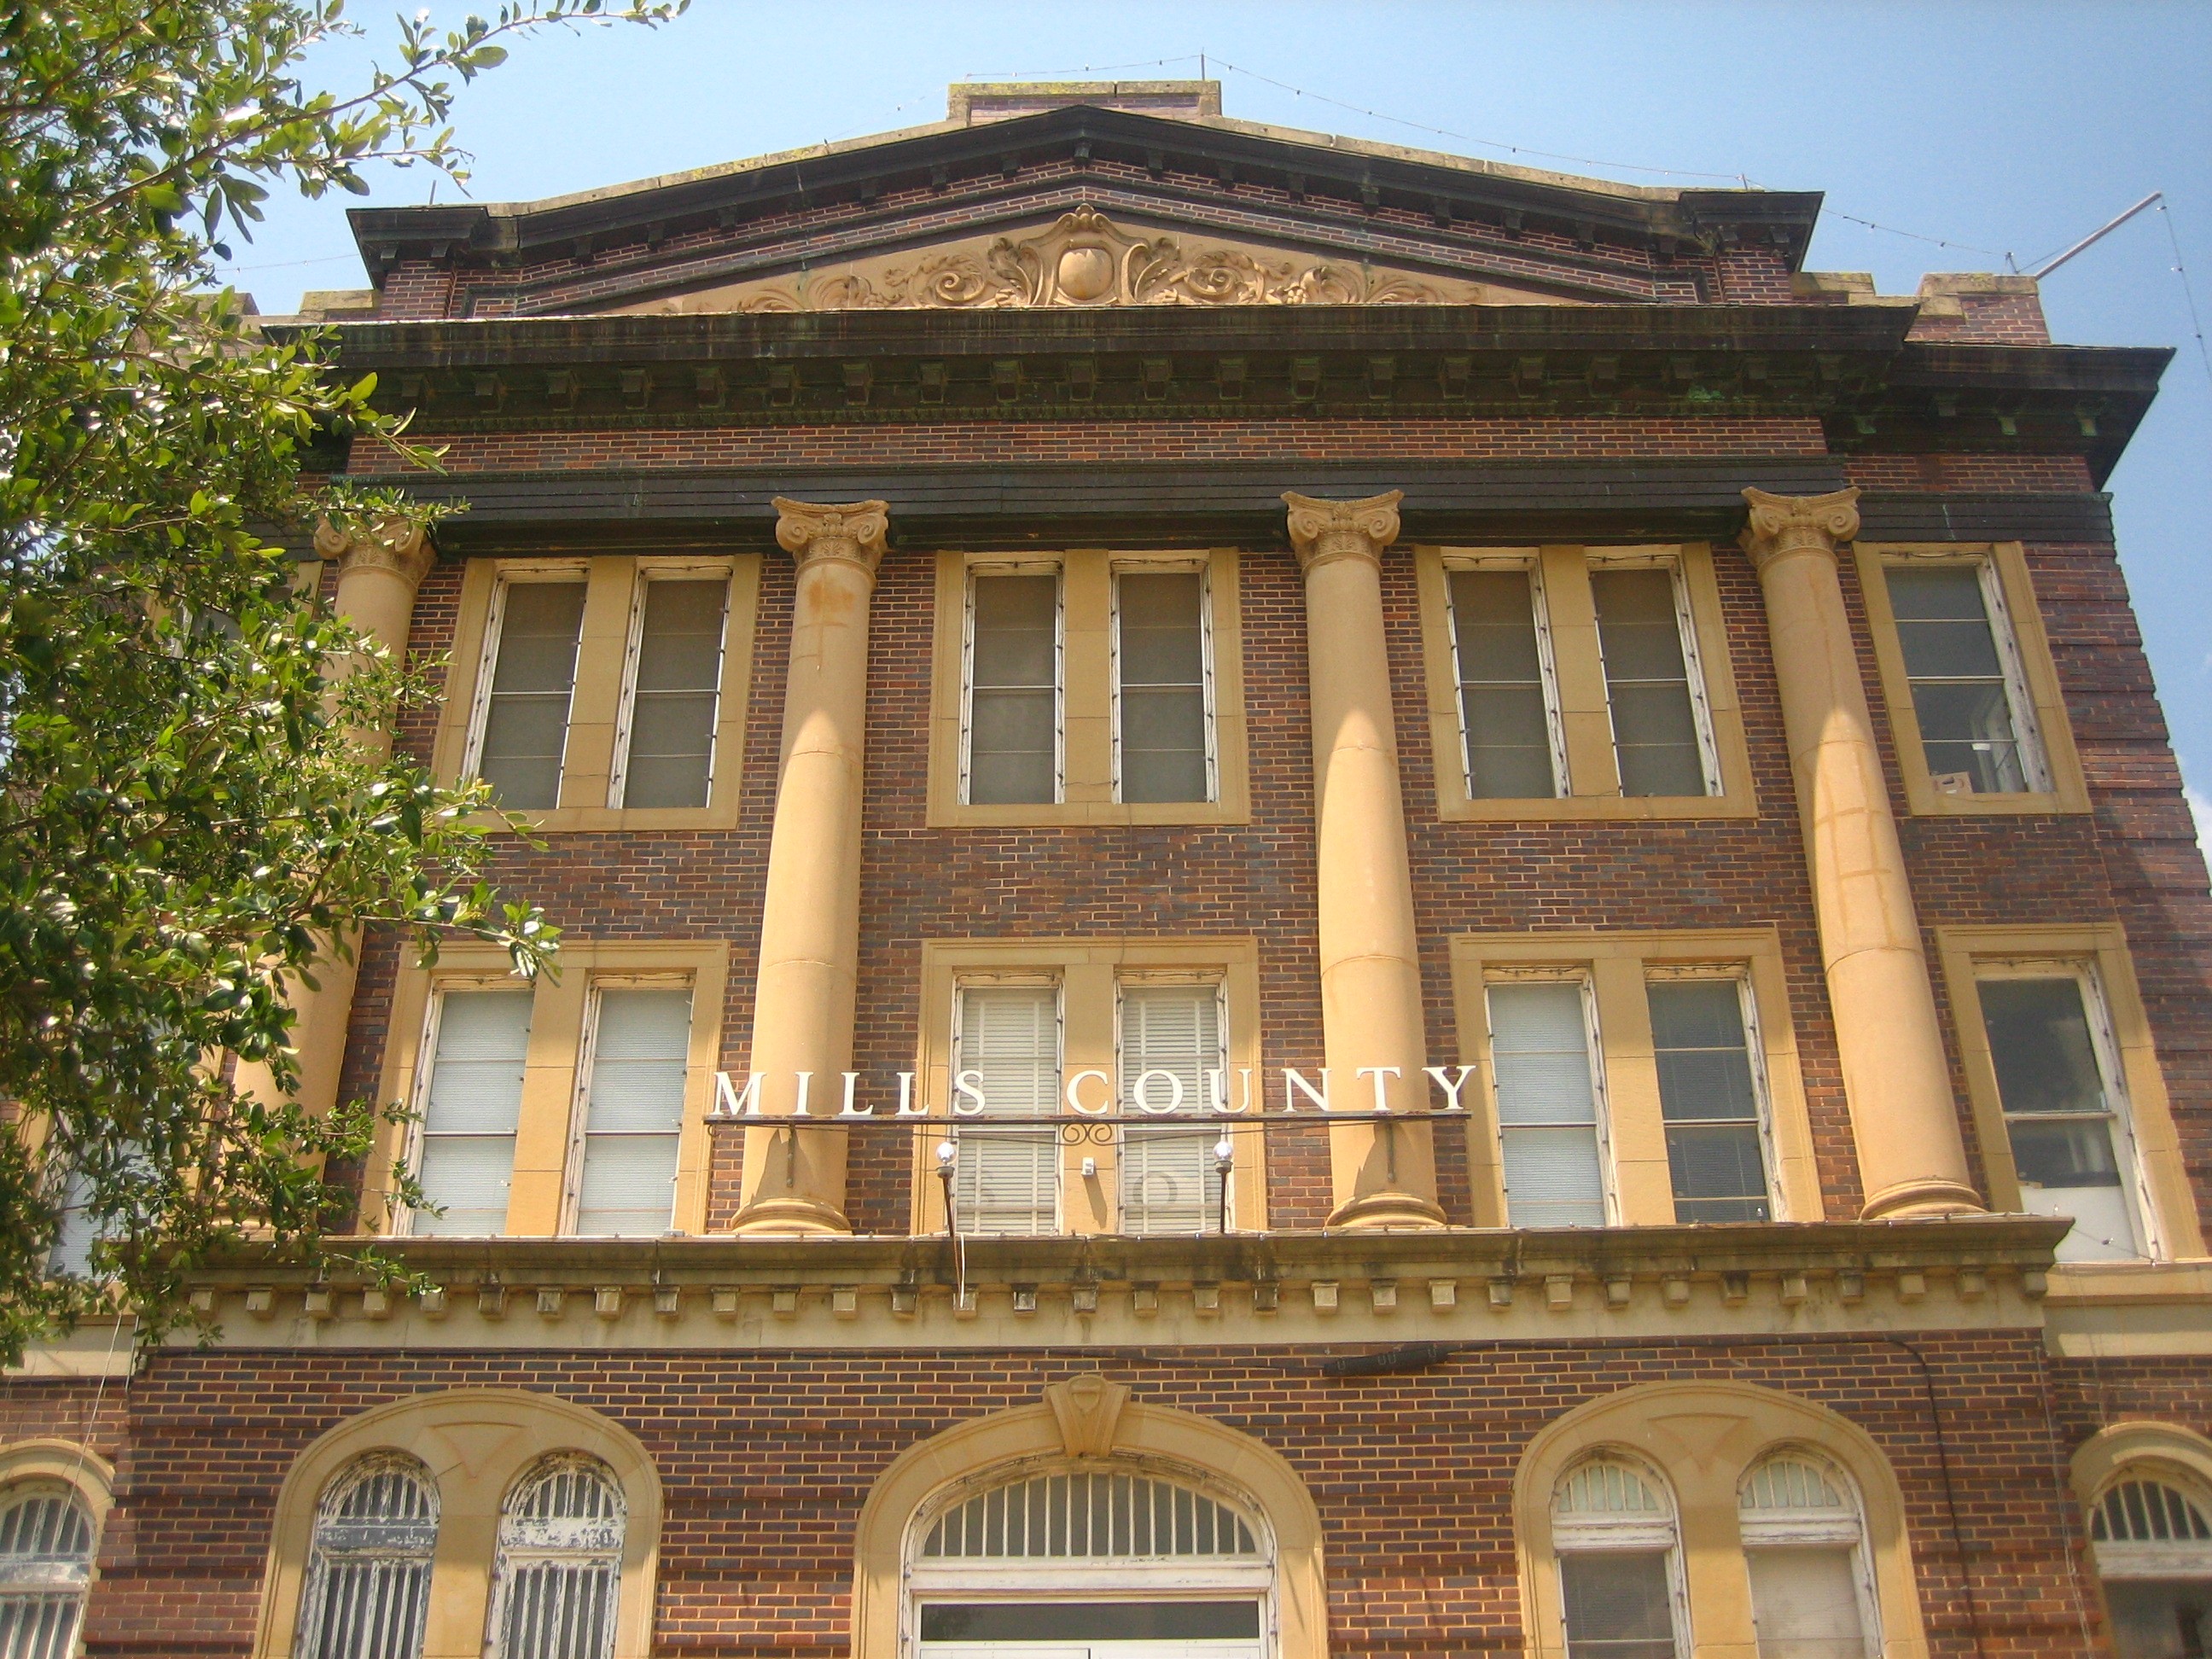 Photo of Mills County Courthouse